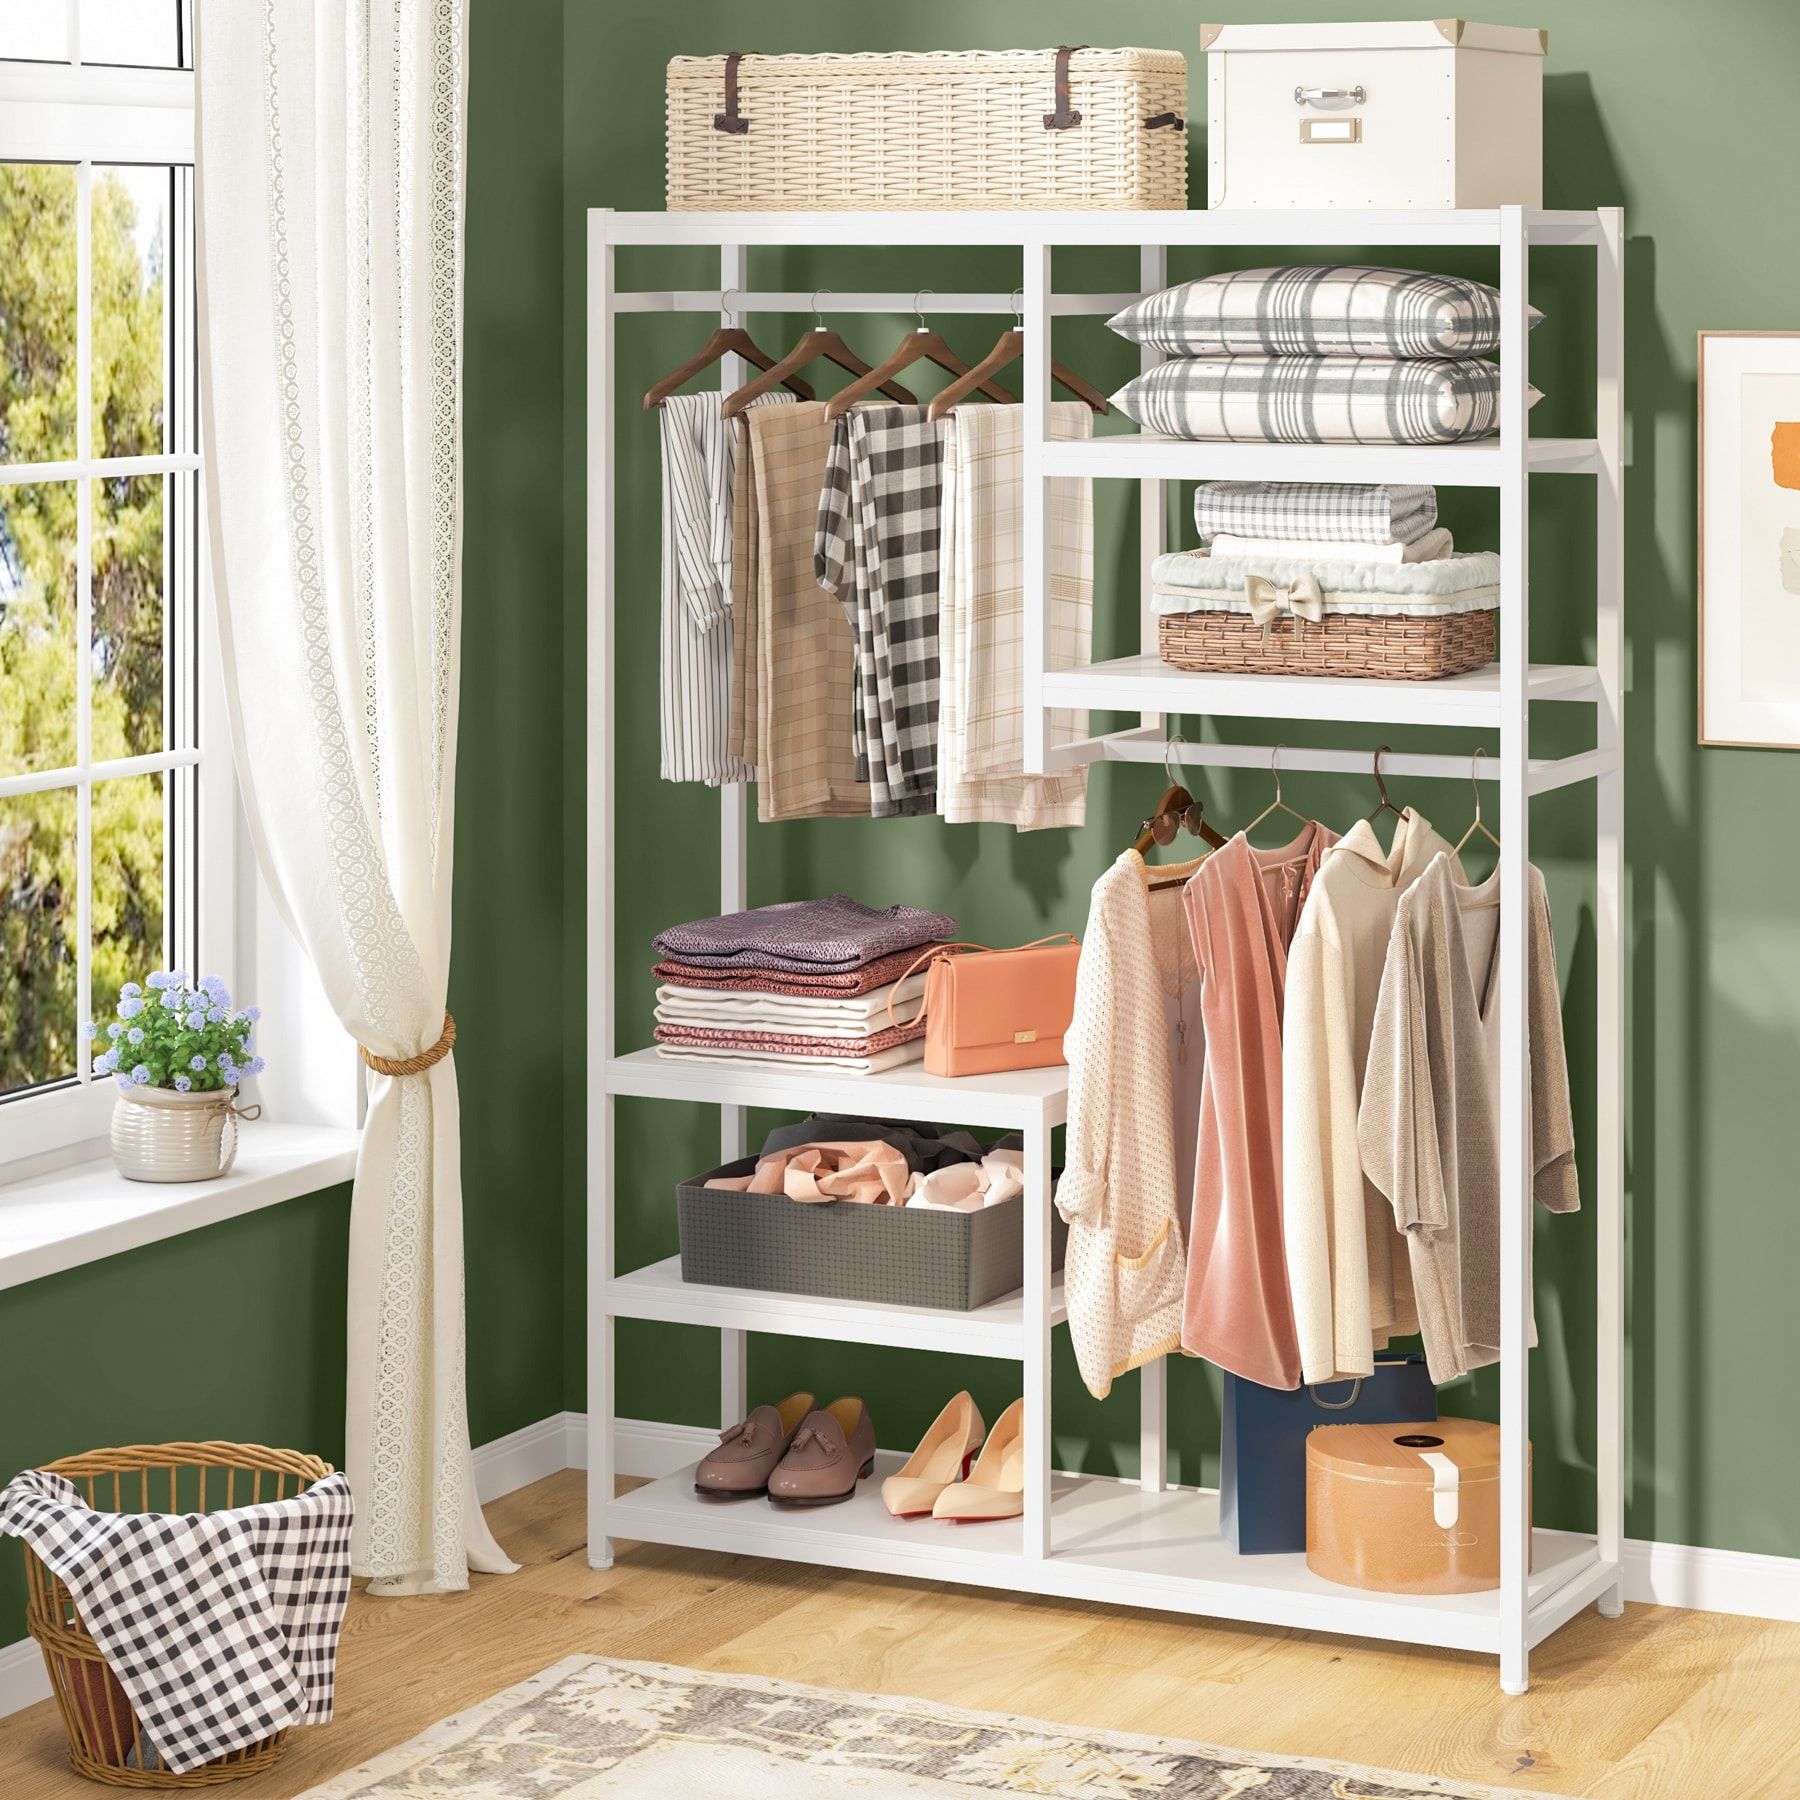 Free Standing Closet Organizer Double Hanging Rod Clothes Garment Racks –  Bed Bath & Beyond – 30537676 For Wardrobes With Garment Rod (View 6 of 15)